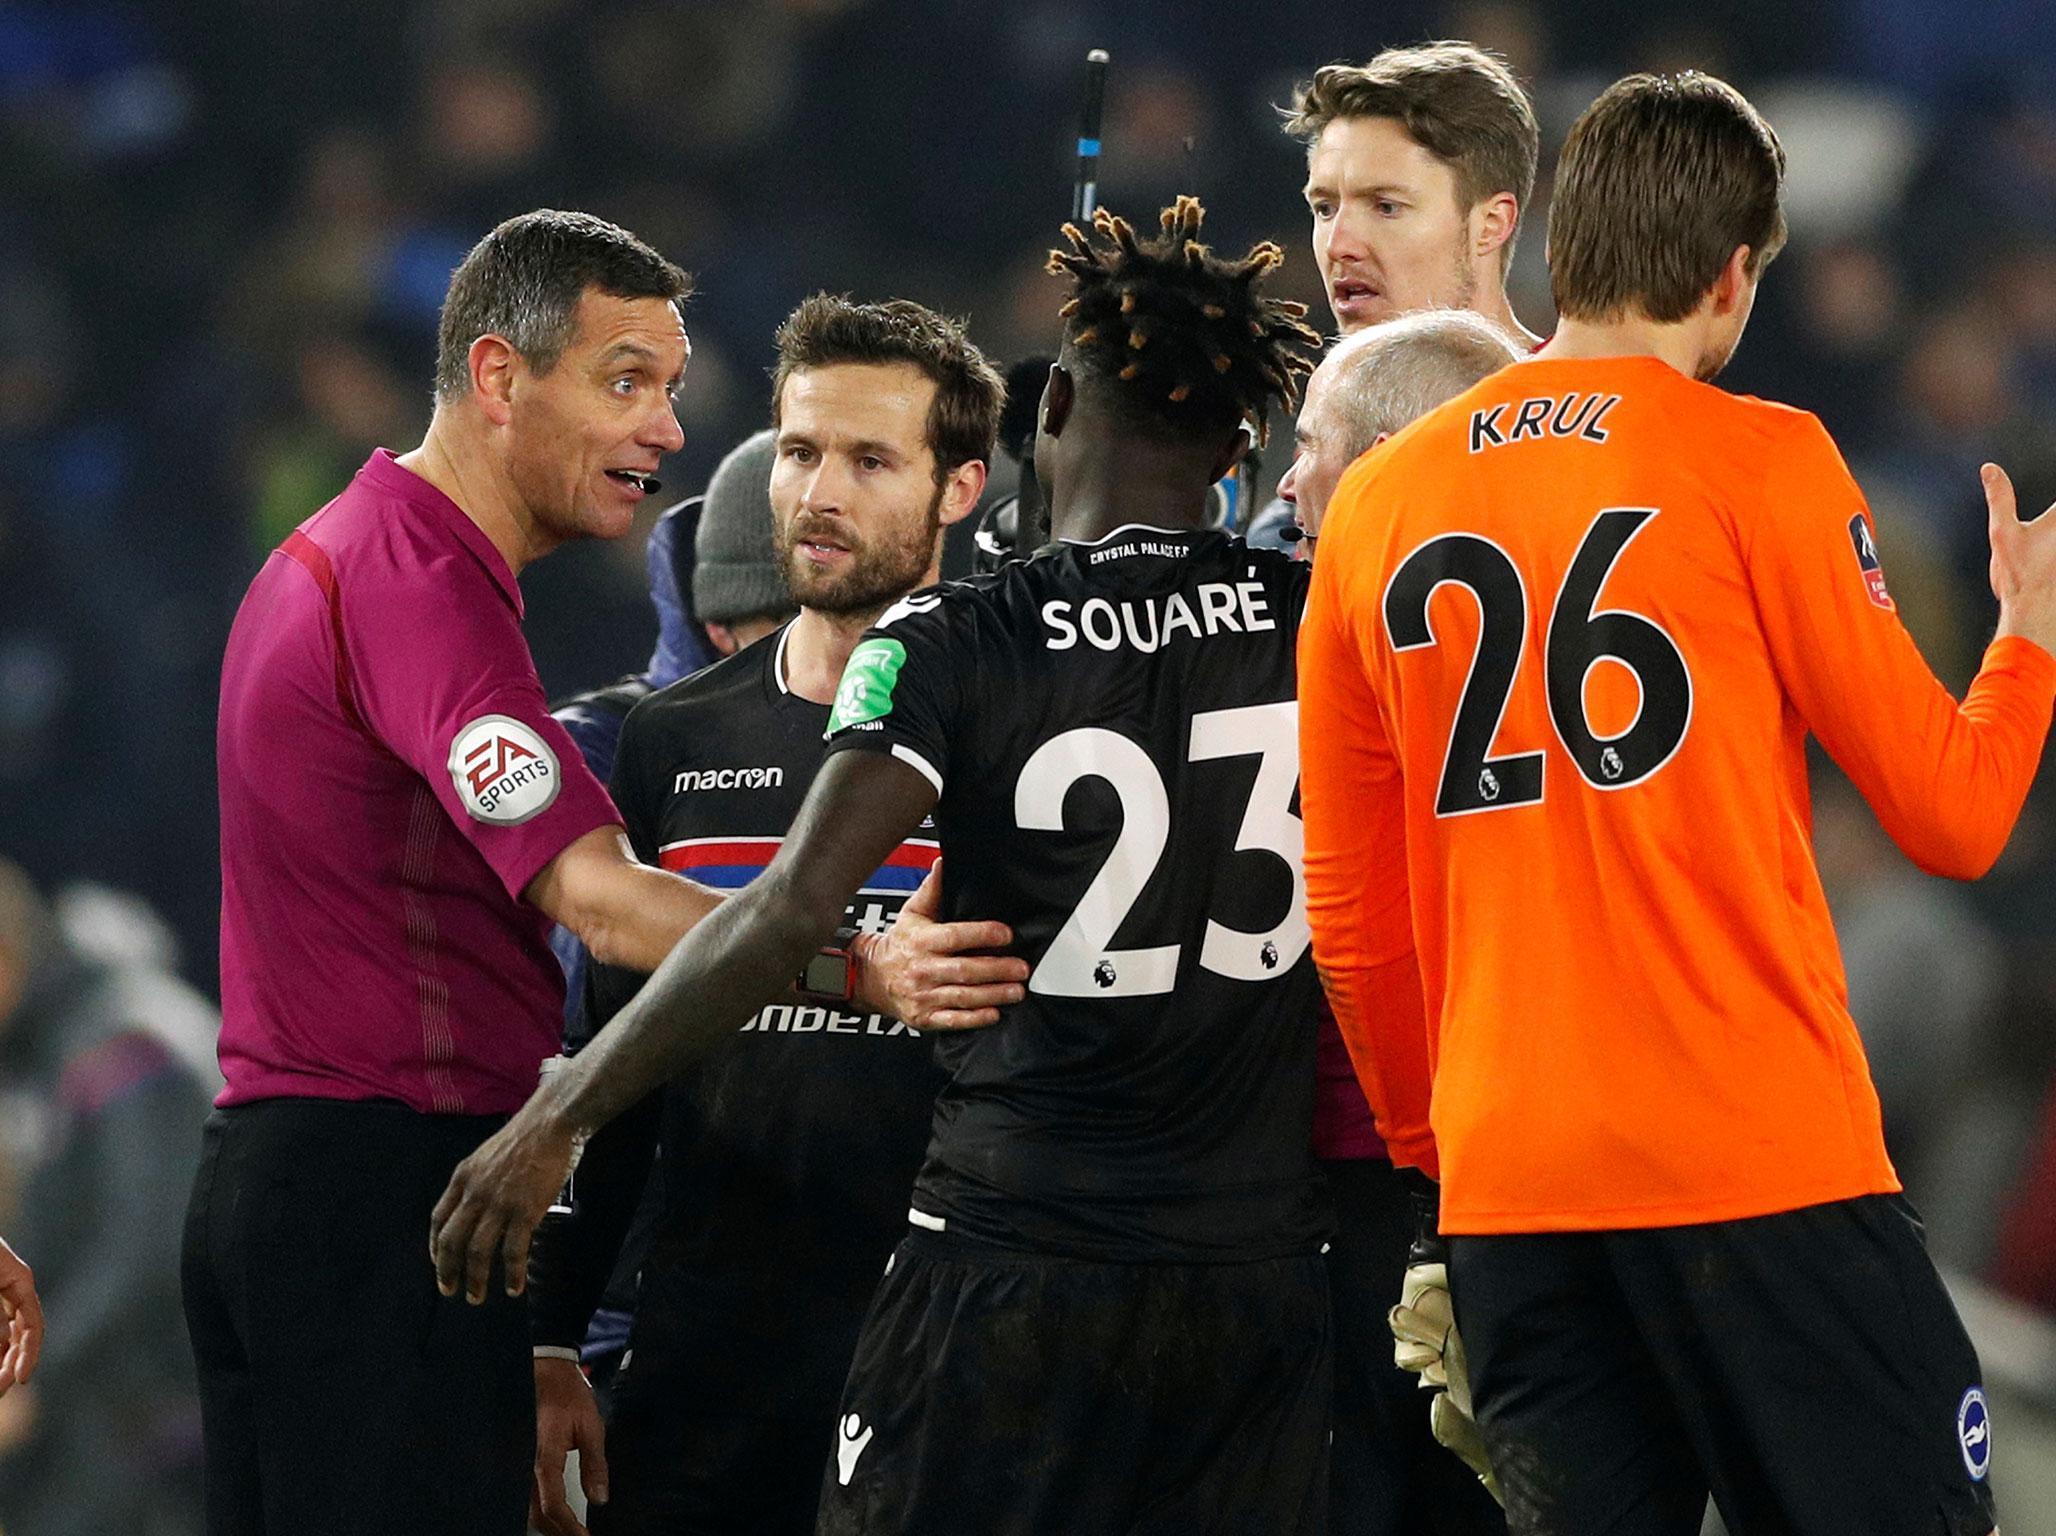 VAR got its first outing in the FA Cup game between Brighton and Crystal Palace